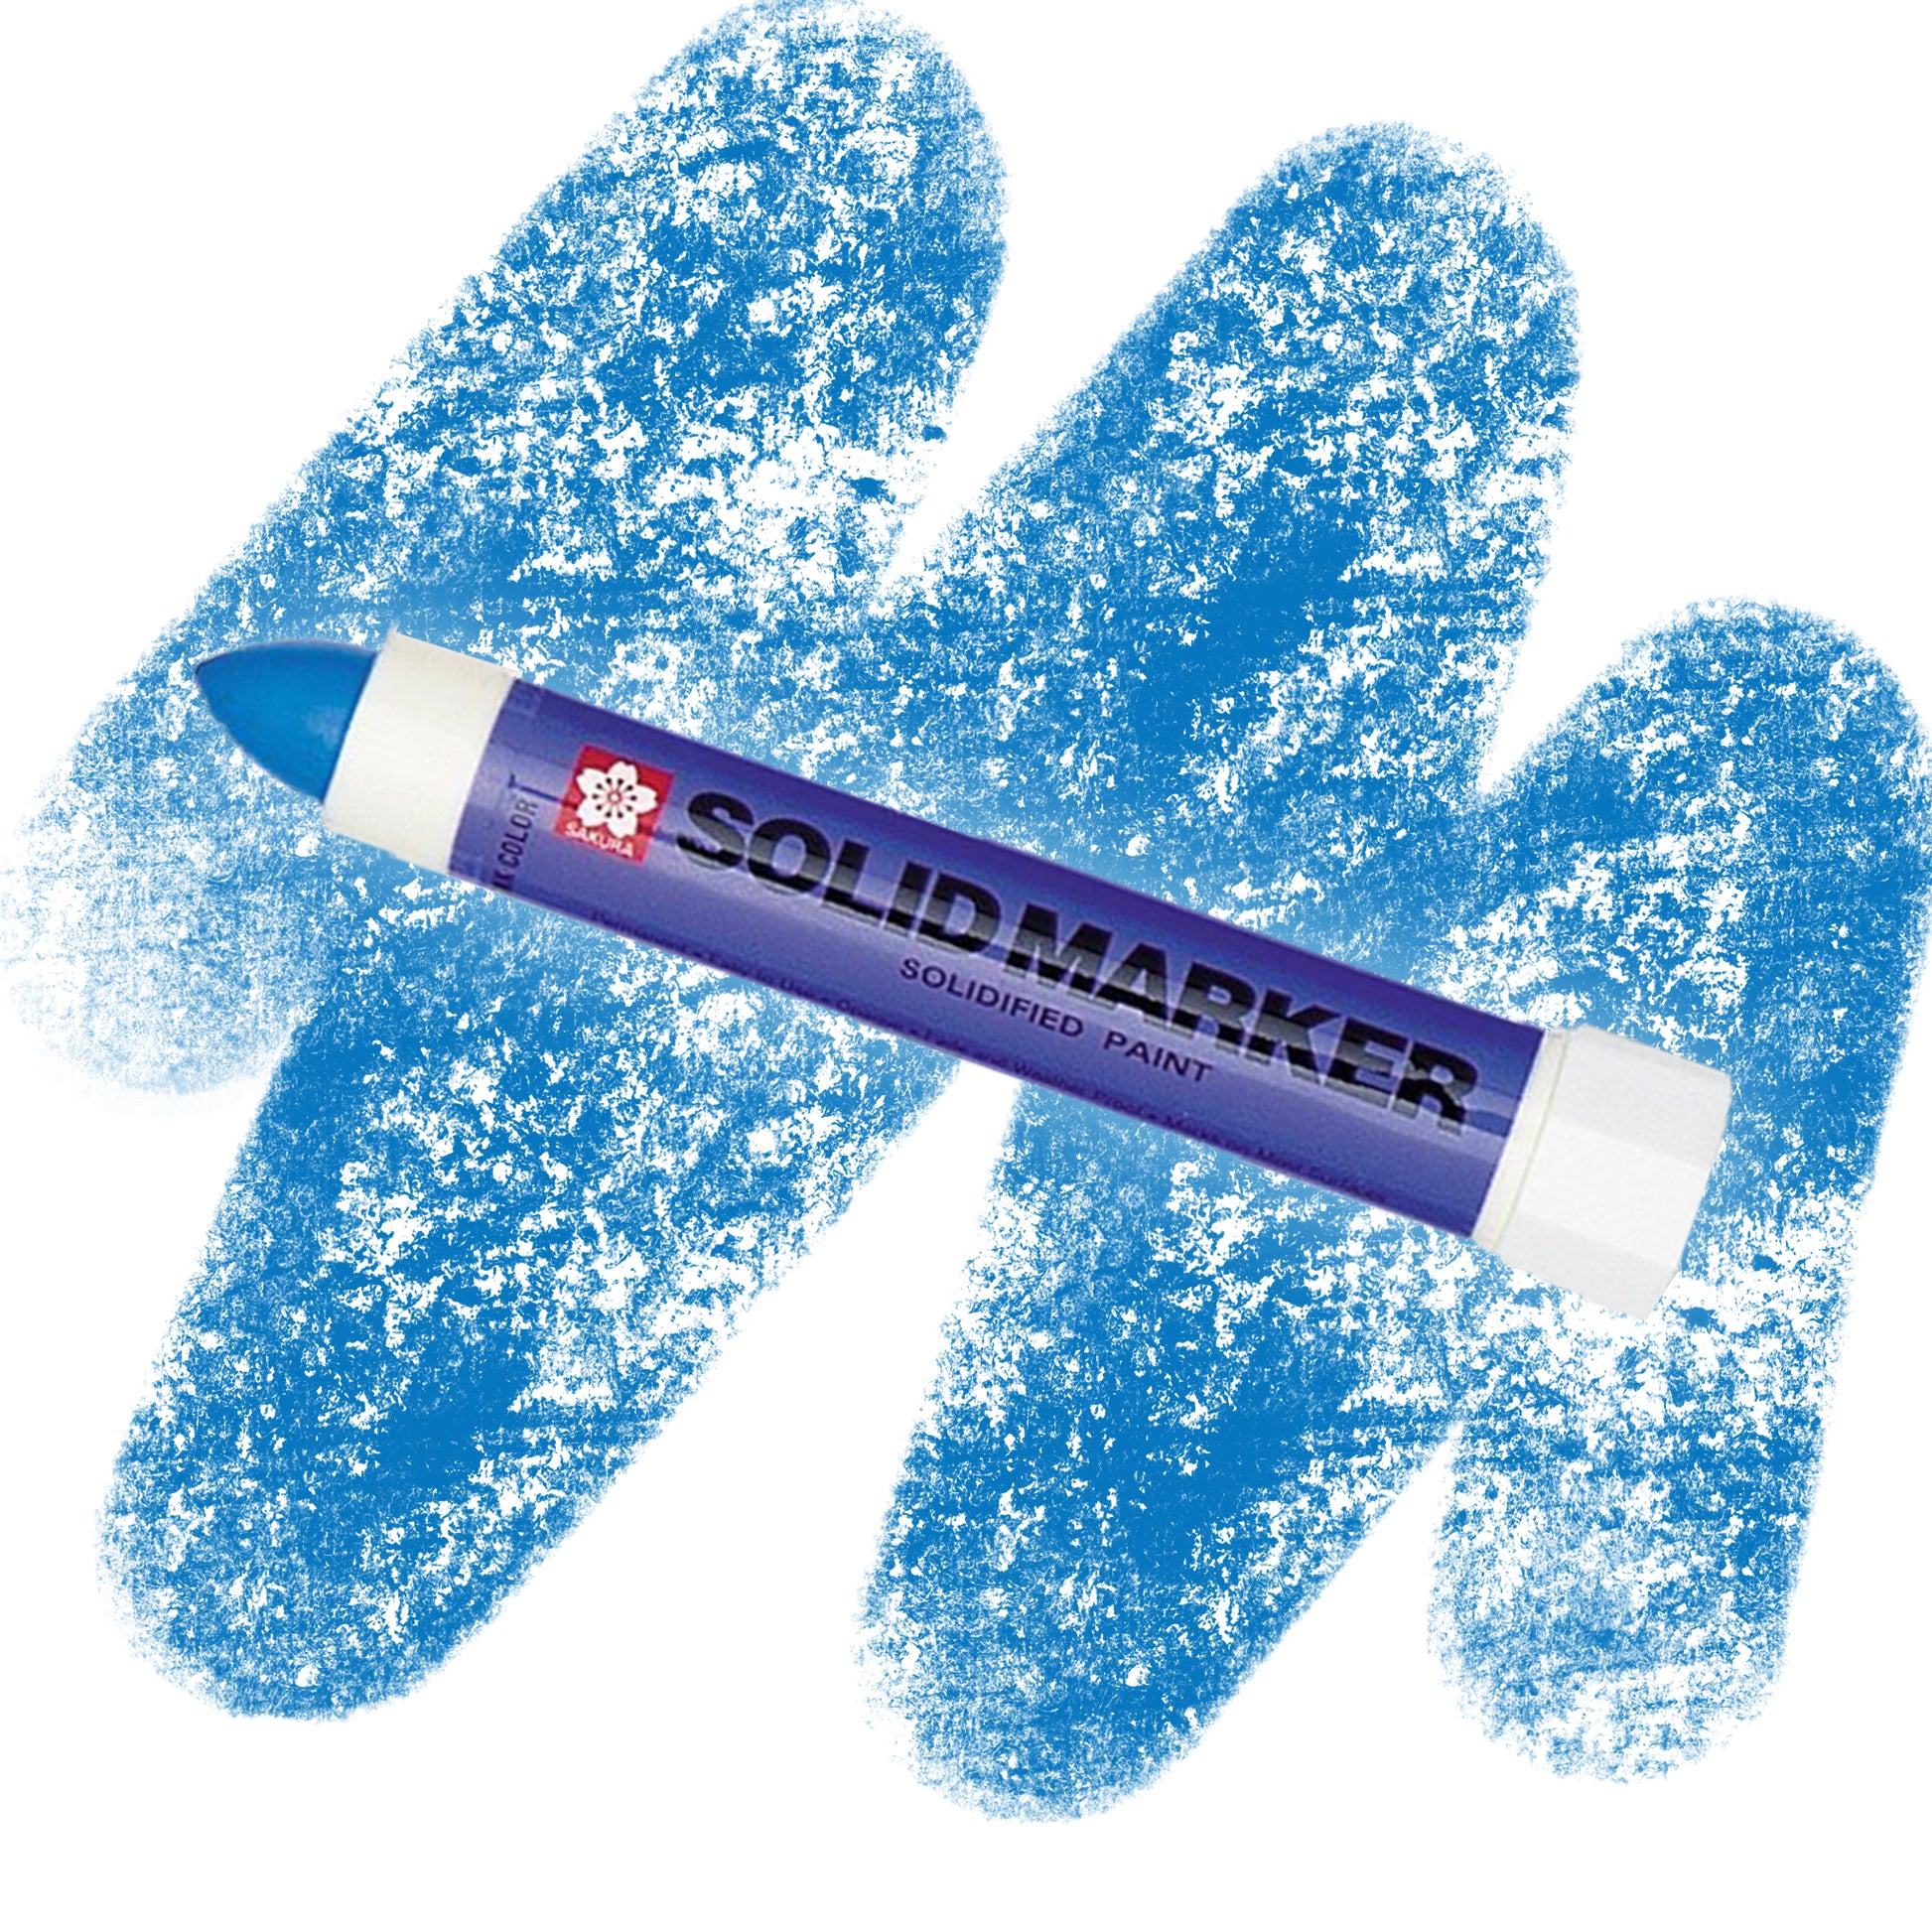 A blue marker with a purple label that reads " SOLID MARKER" with a blue crayon swatch.